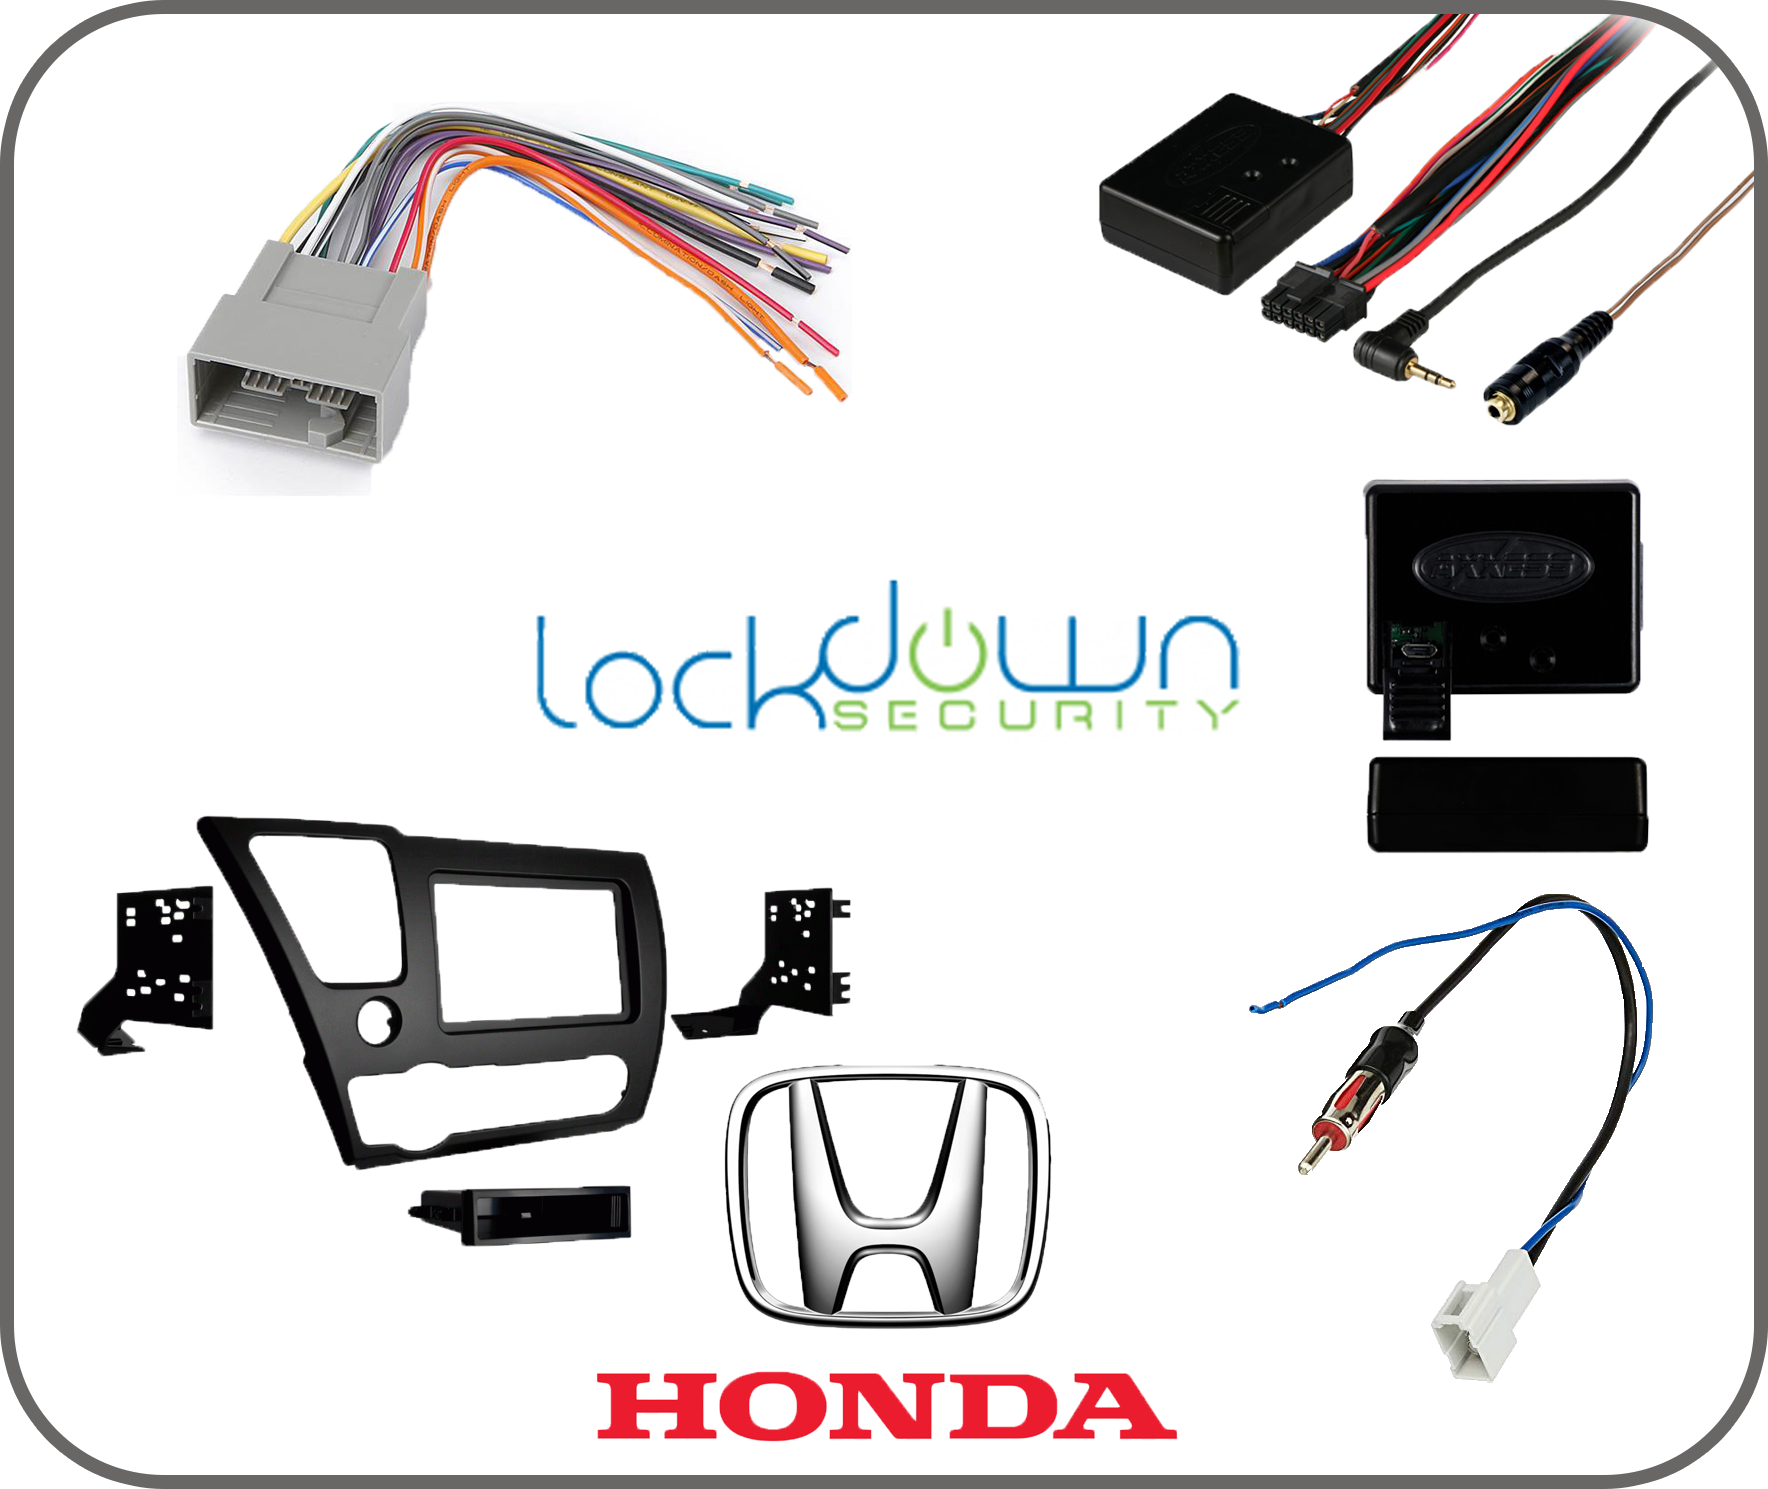 WITH SWC ⭕ Honda Civic 2013-2015 Radio Replacement Parts Bundle ⭕ Includes Metra 99-7882B Mount Kit, Metra 70-1729 Wire Harness, Metra 40-HD11 Antenna Adapter, Axxess AXSWC Steering Wheel Control Interface